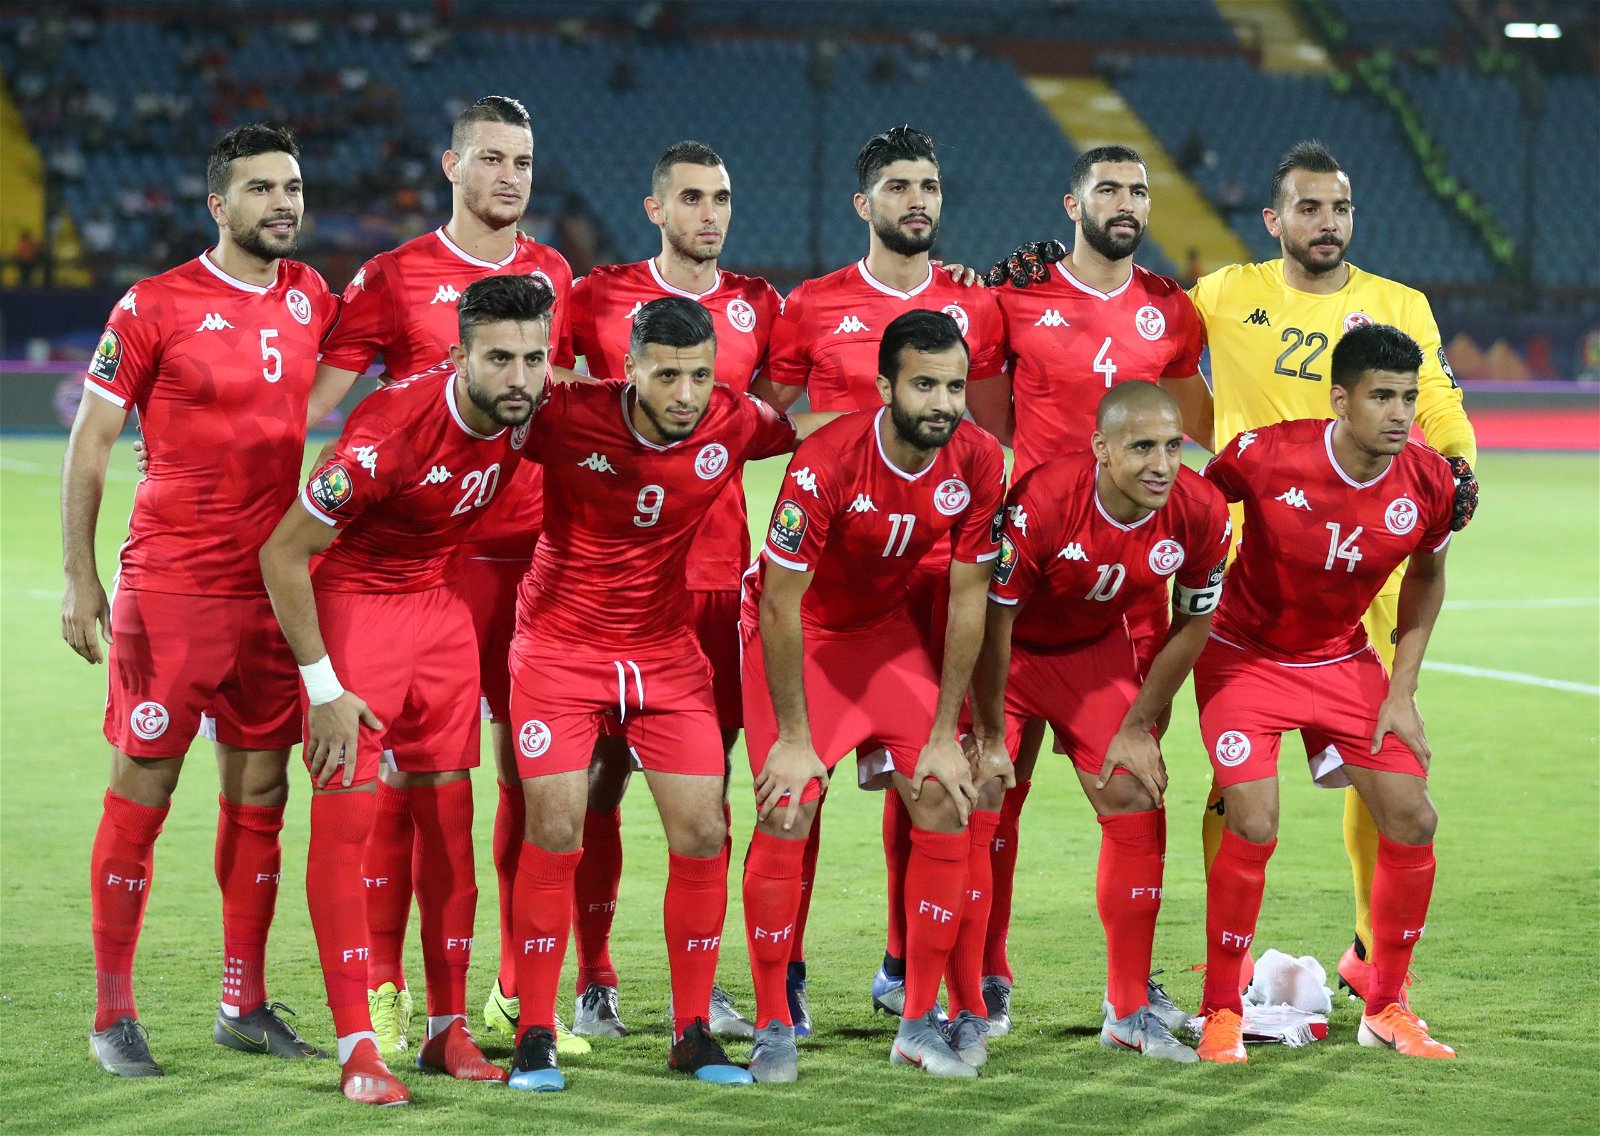 Tunisia Africa Cup of Nations squad 2021